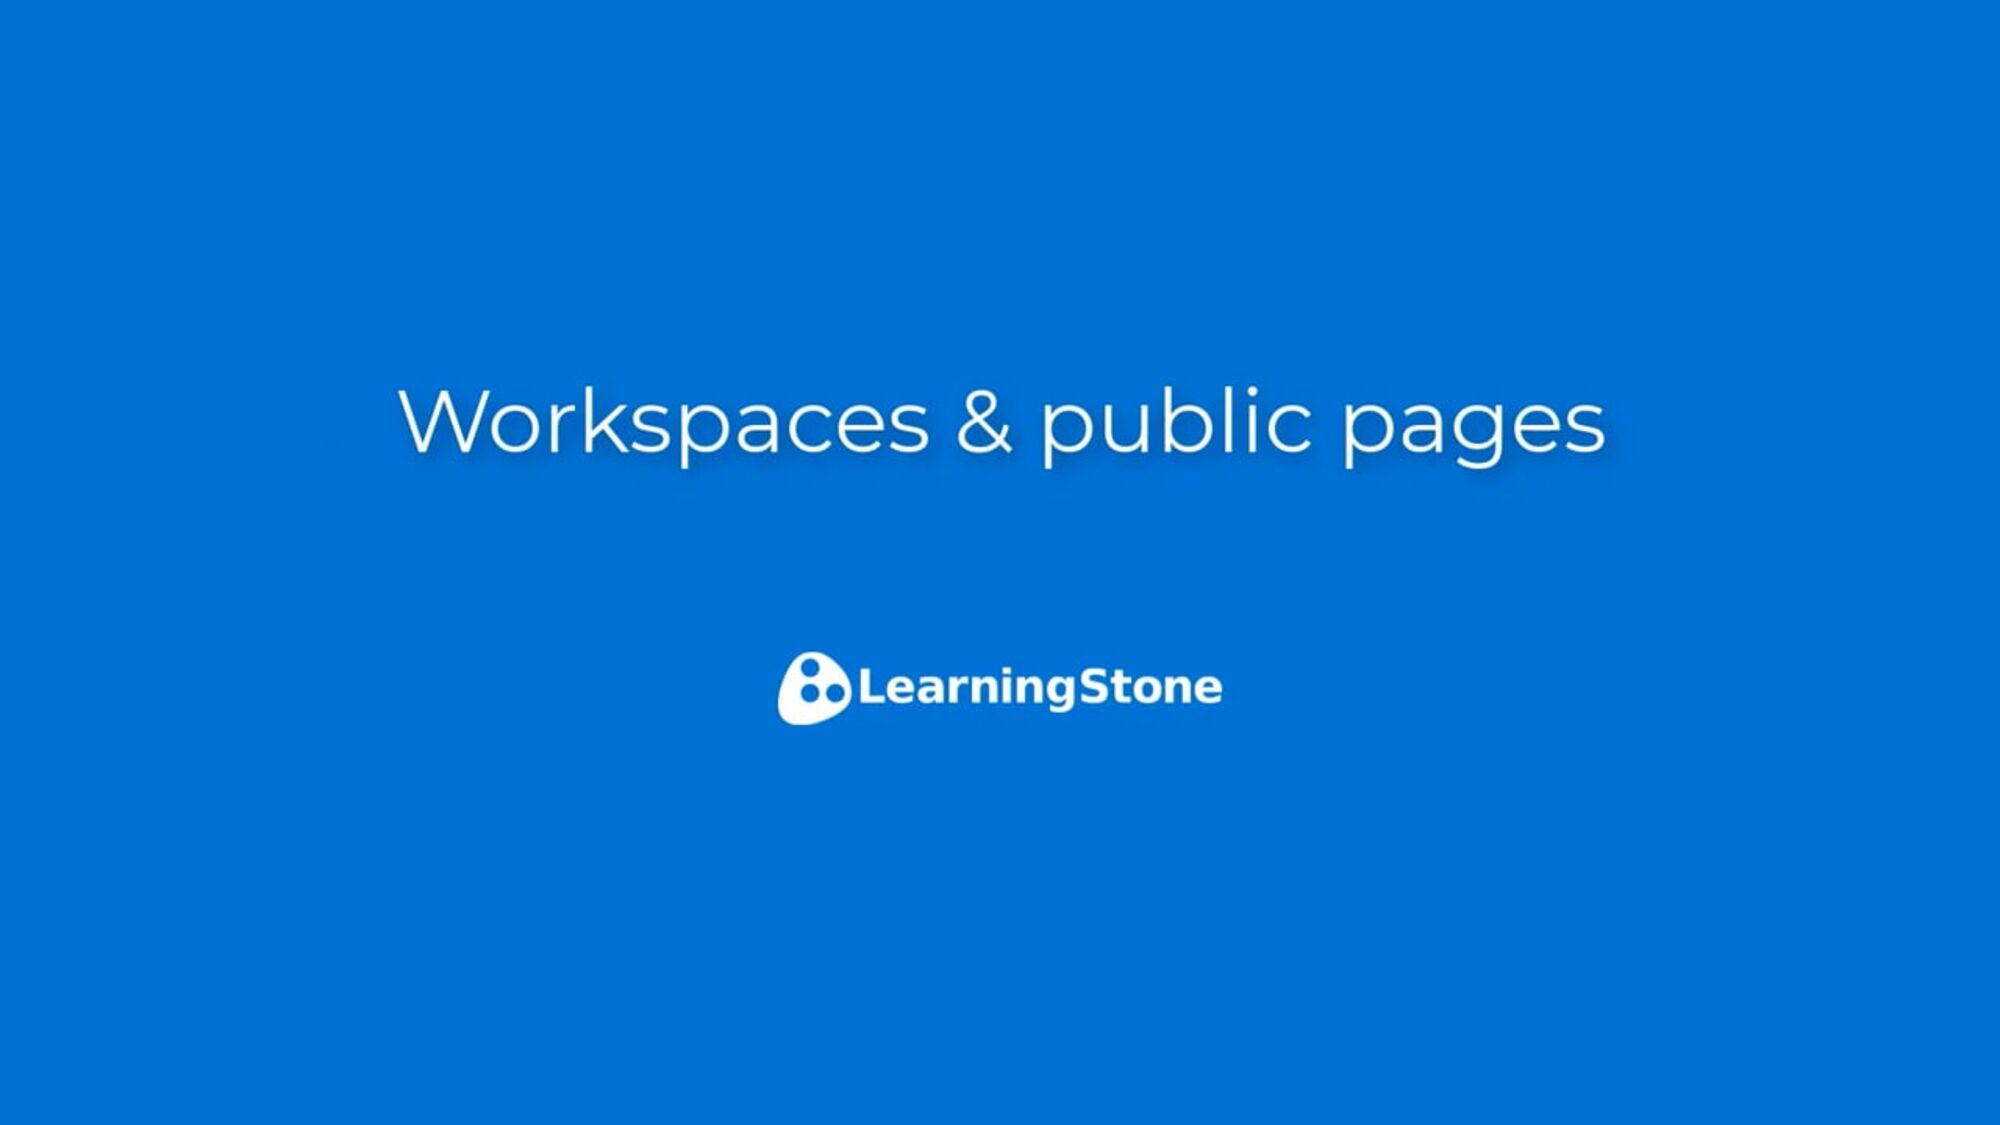 LearningStone workspaces & public pages